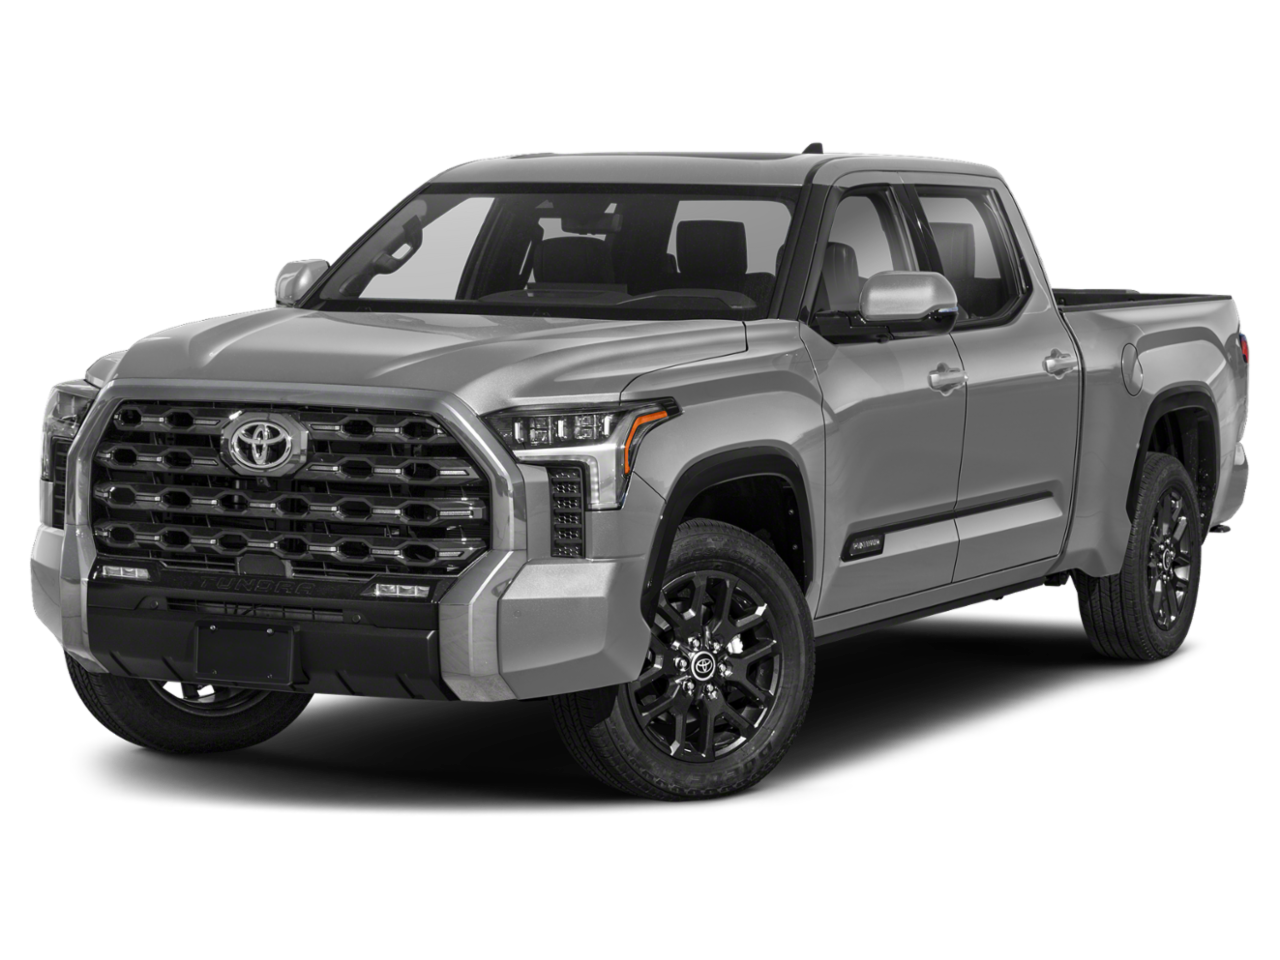 New Toyota Tundra 4WD from your Great Falls, MT dealership, City Motor